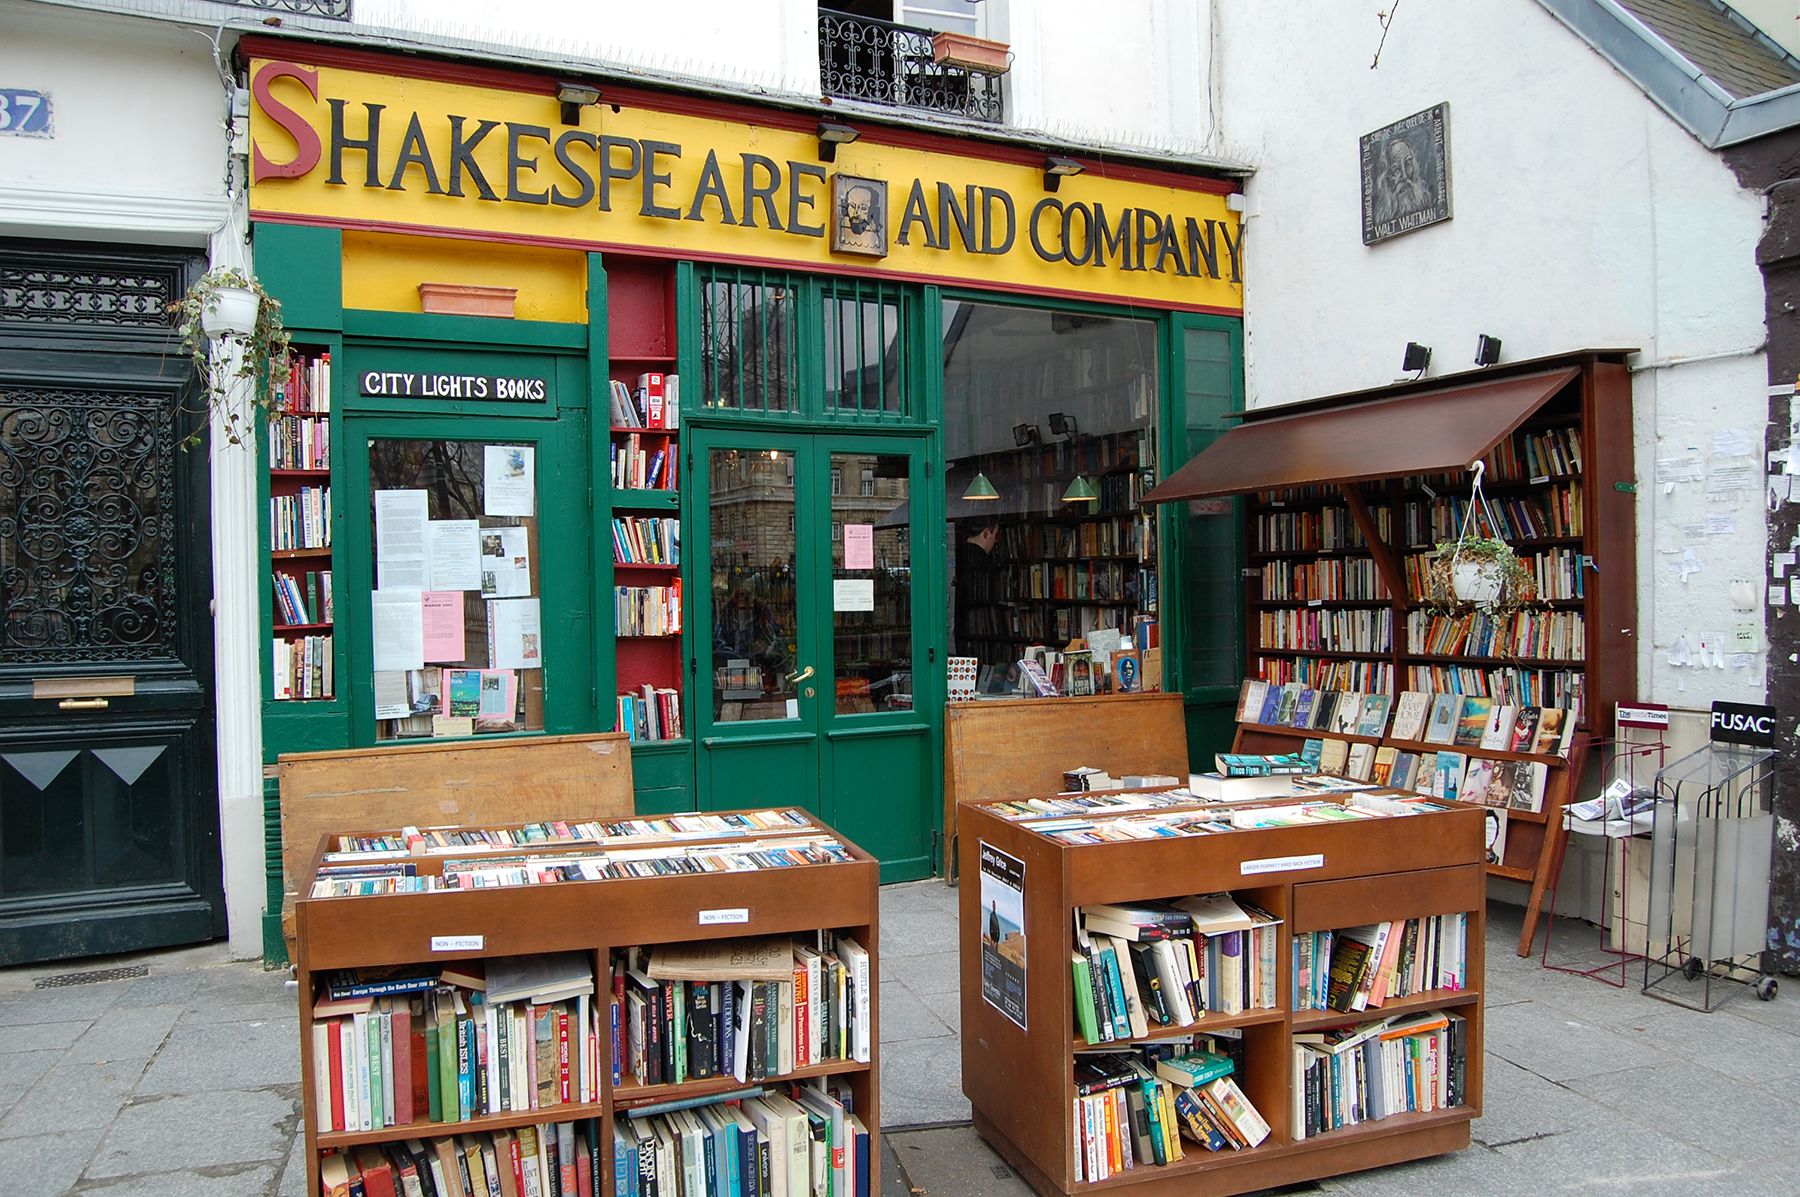 Booking it through Europe: Top literary stops